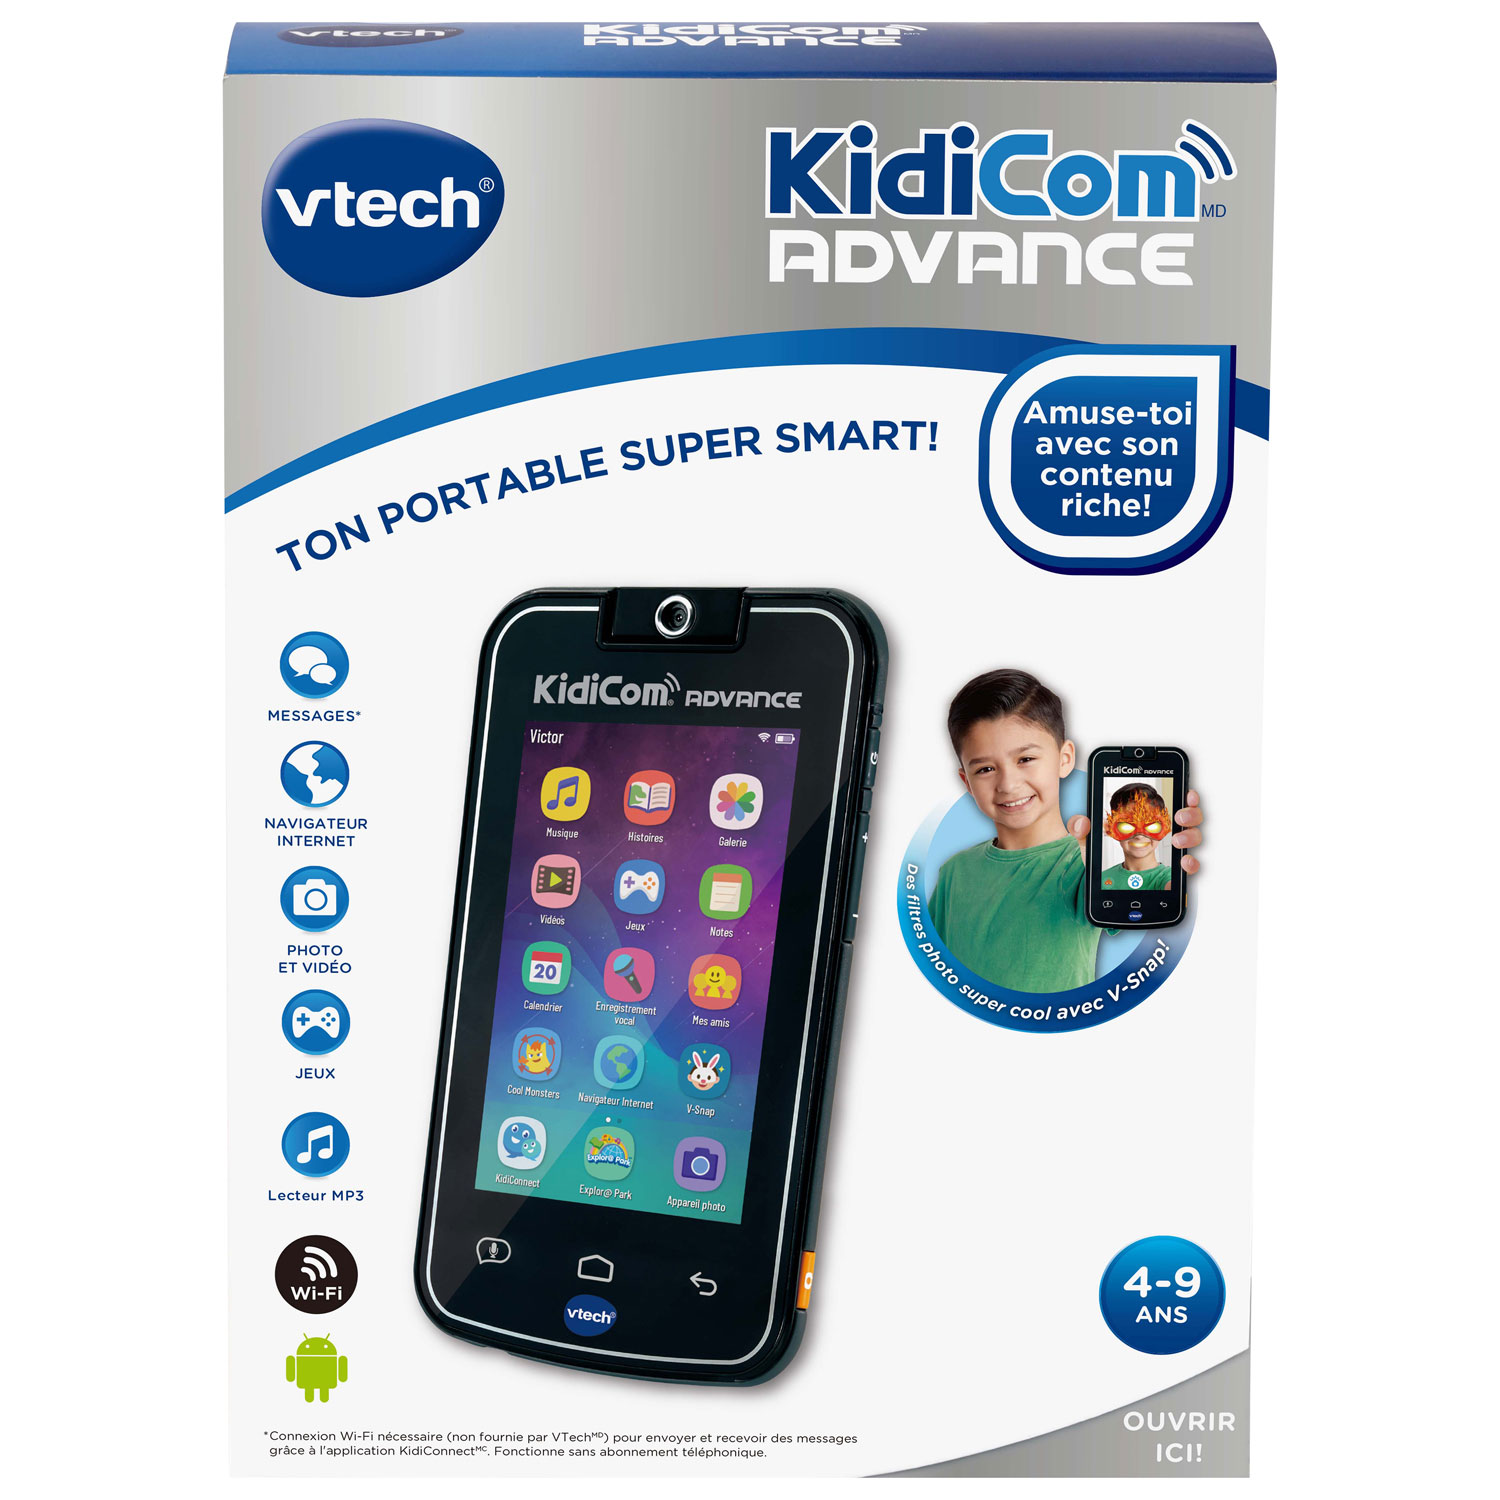 VTech 80-186622 Kidicom Advance Smart Device for Kids 180/° Rotating Lens for Photos Gaming Black Parental Control 5 HD Touch Screen Selfies and Videos